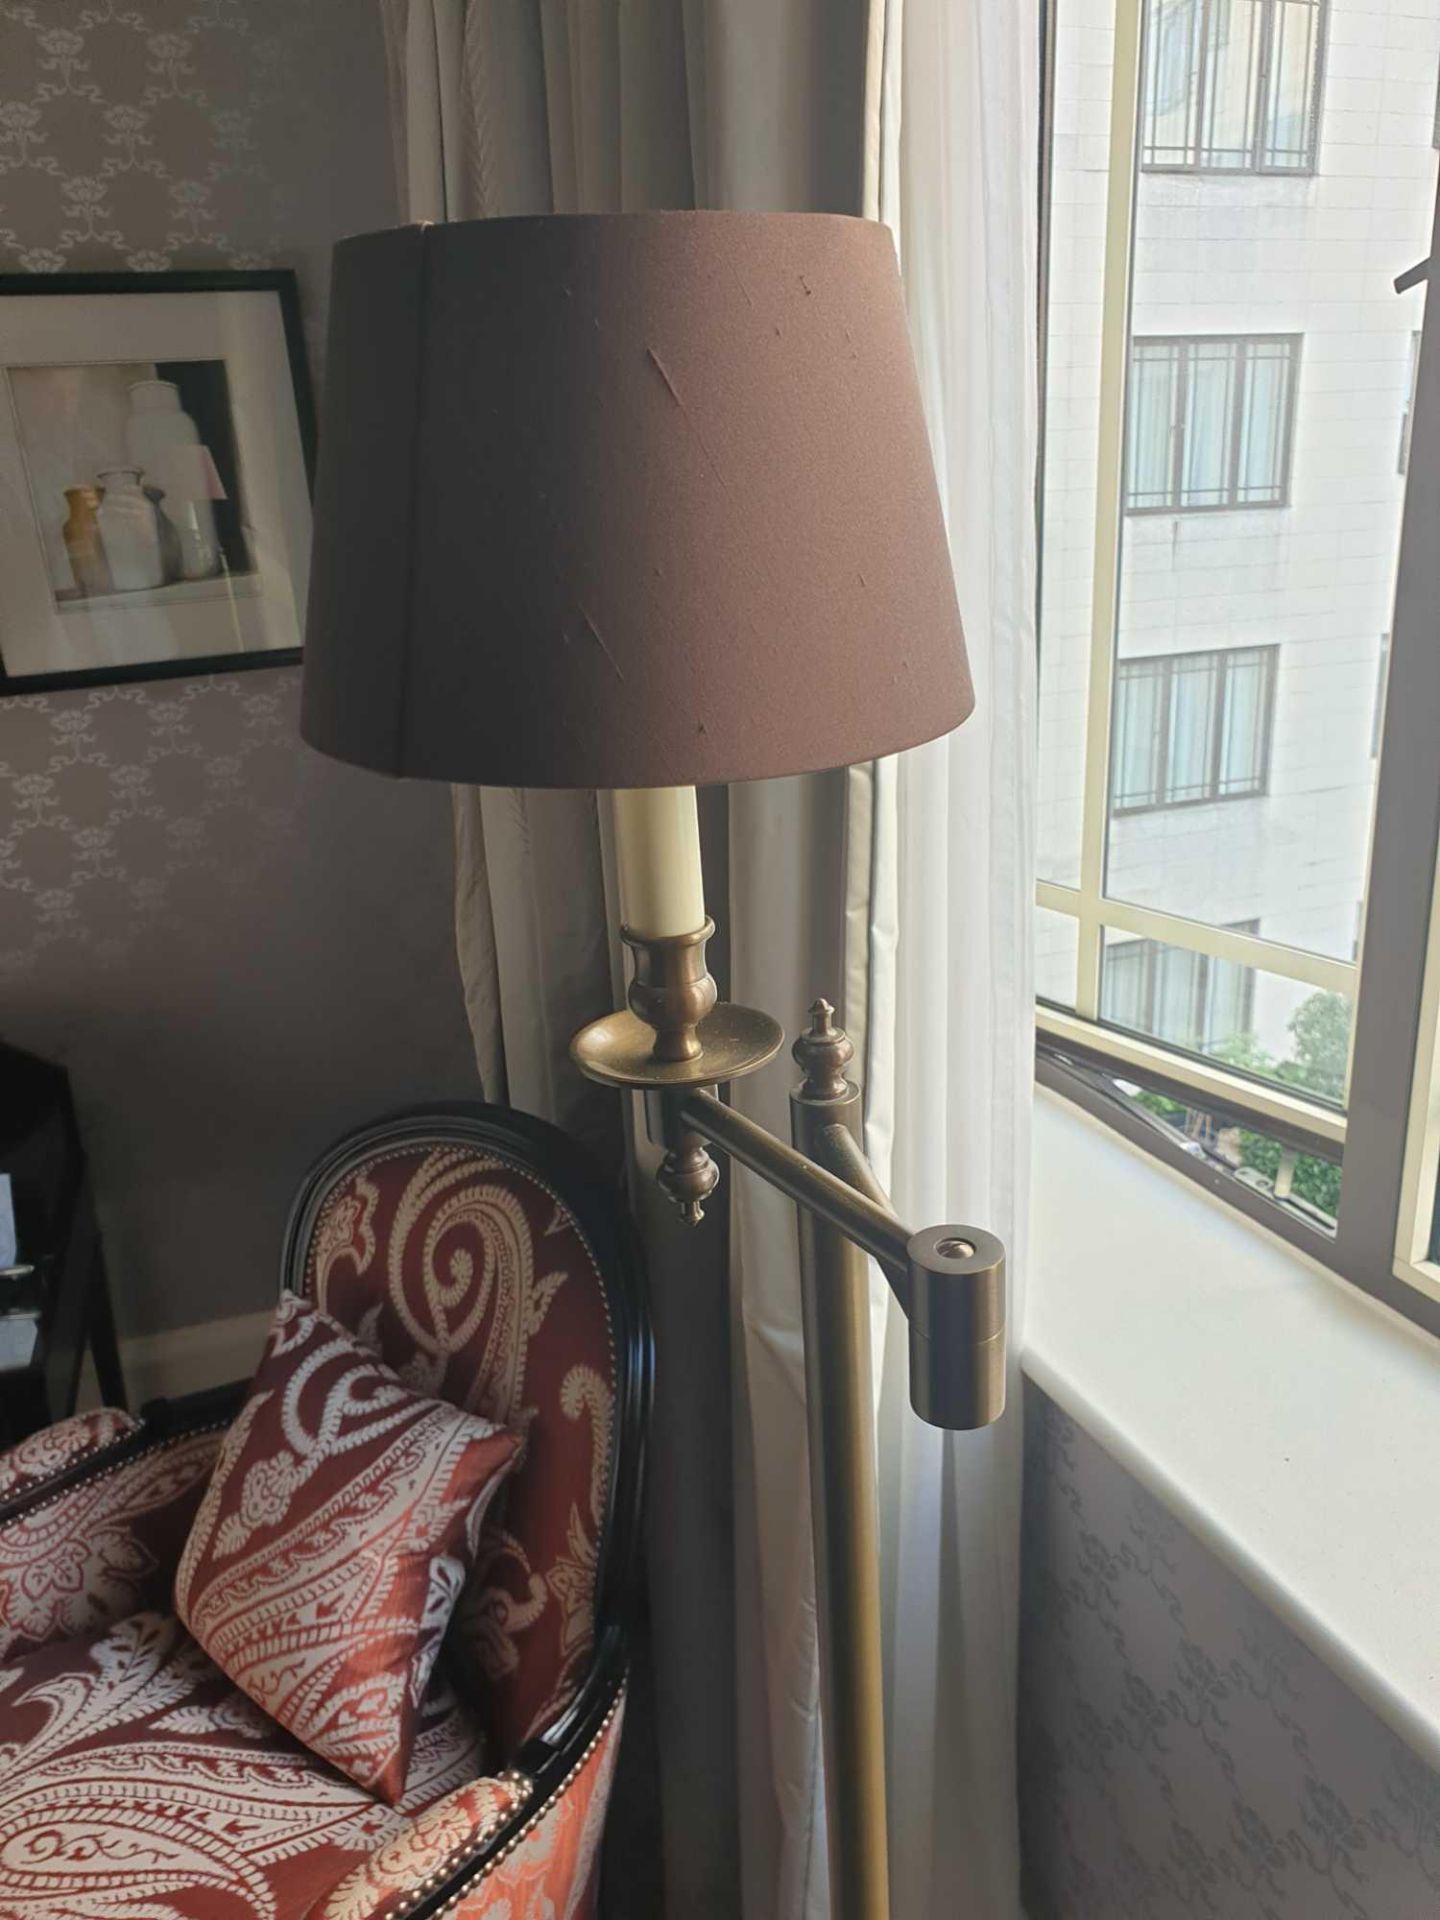 Library Floor Lamp Finished In English Bronze Swing Arm Function With Shade 156cm (Room 331) (This - Image 2 of 2